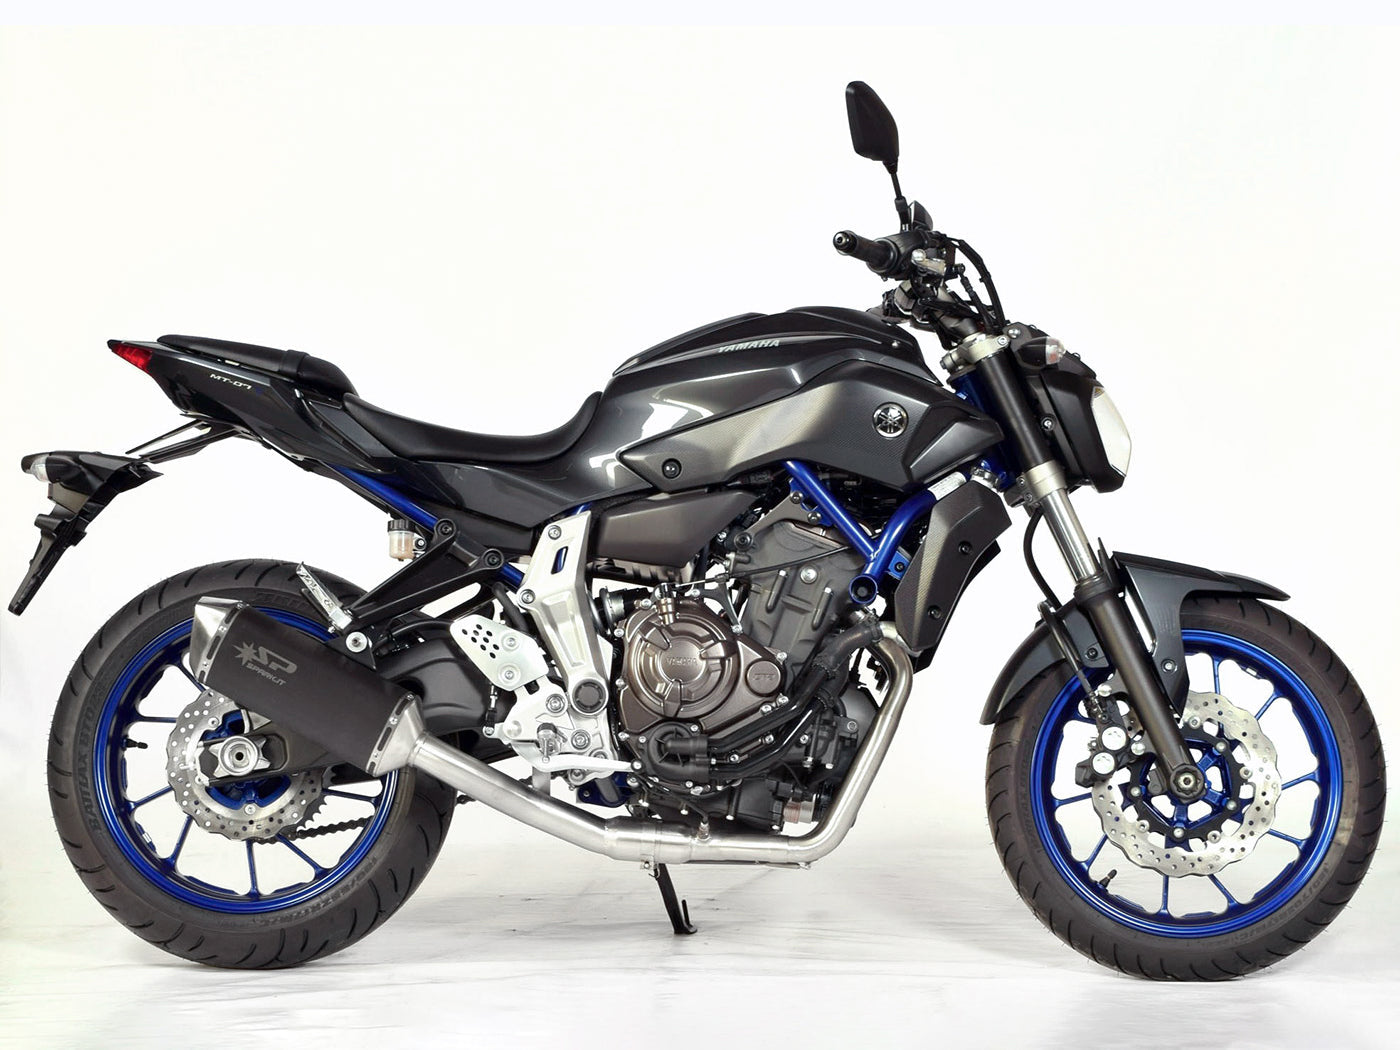 SPARK Yamaha MT-07 Full Exhaust System "Force" (EU homologated; lateral position)